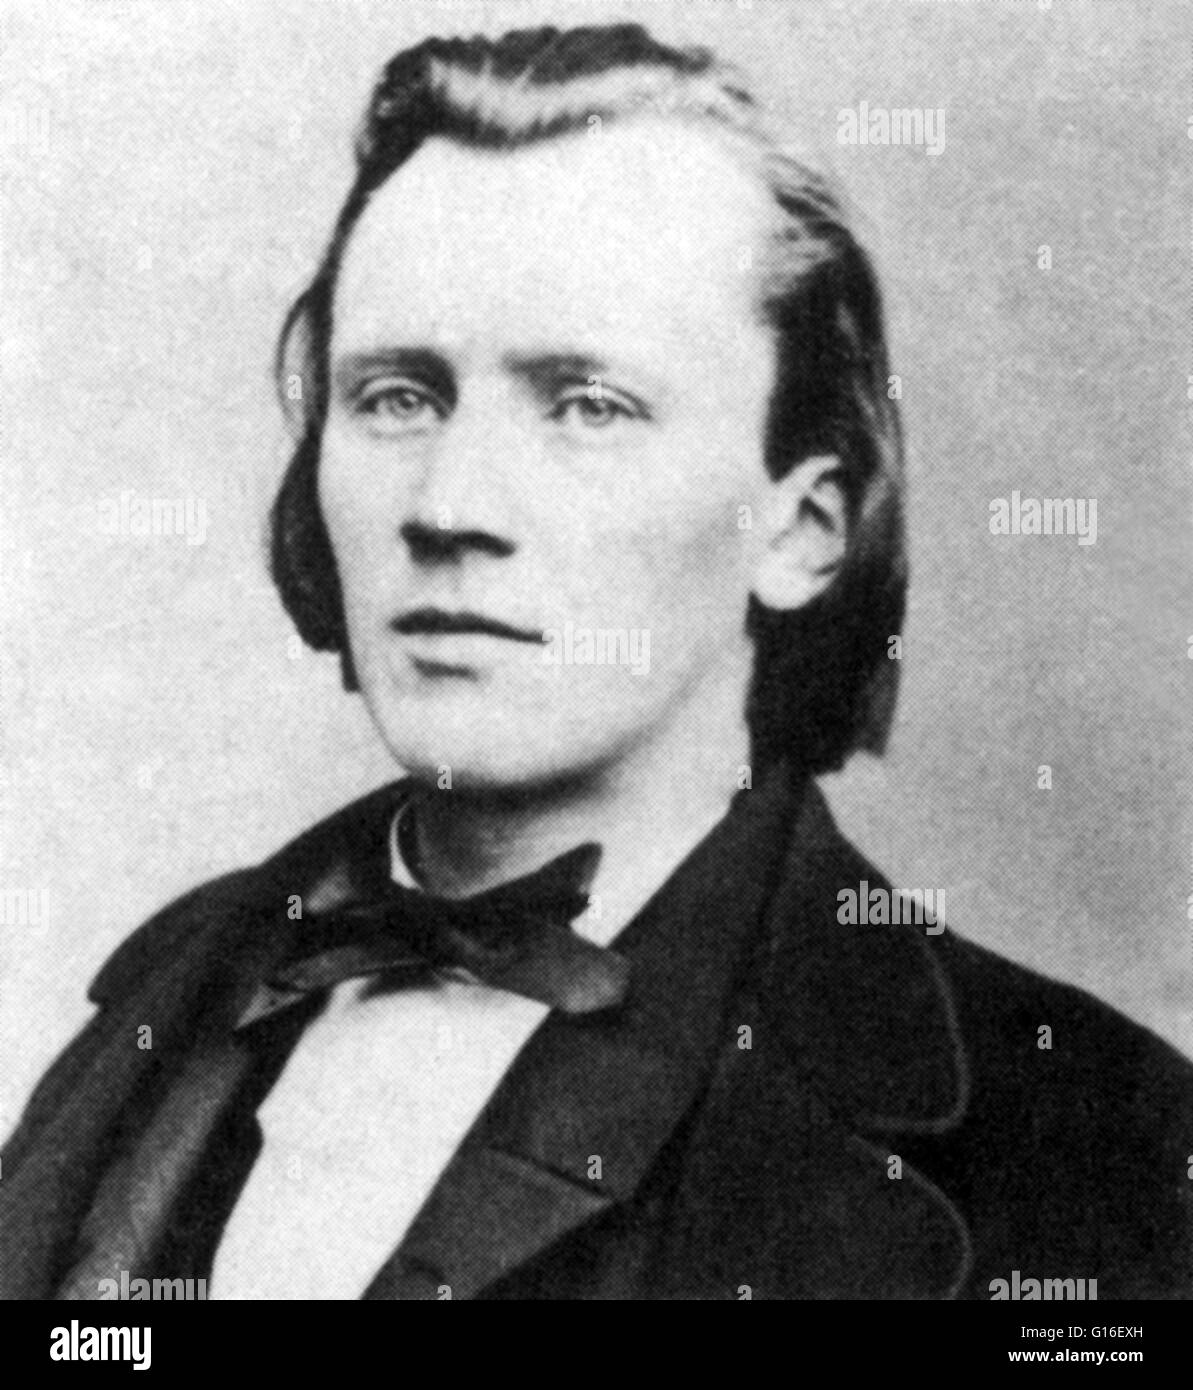 Brahms in his early 30s, when he was writing the German Requiem. Its first performance under the composer's direction took place in Bremen in 1868. Johannes Brahms (May 17, 1833 - April 3, 1897) was a German composer and pianist, and one of the leading mu Stock Photo